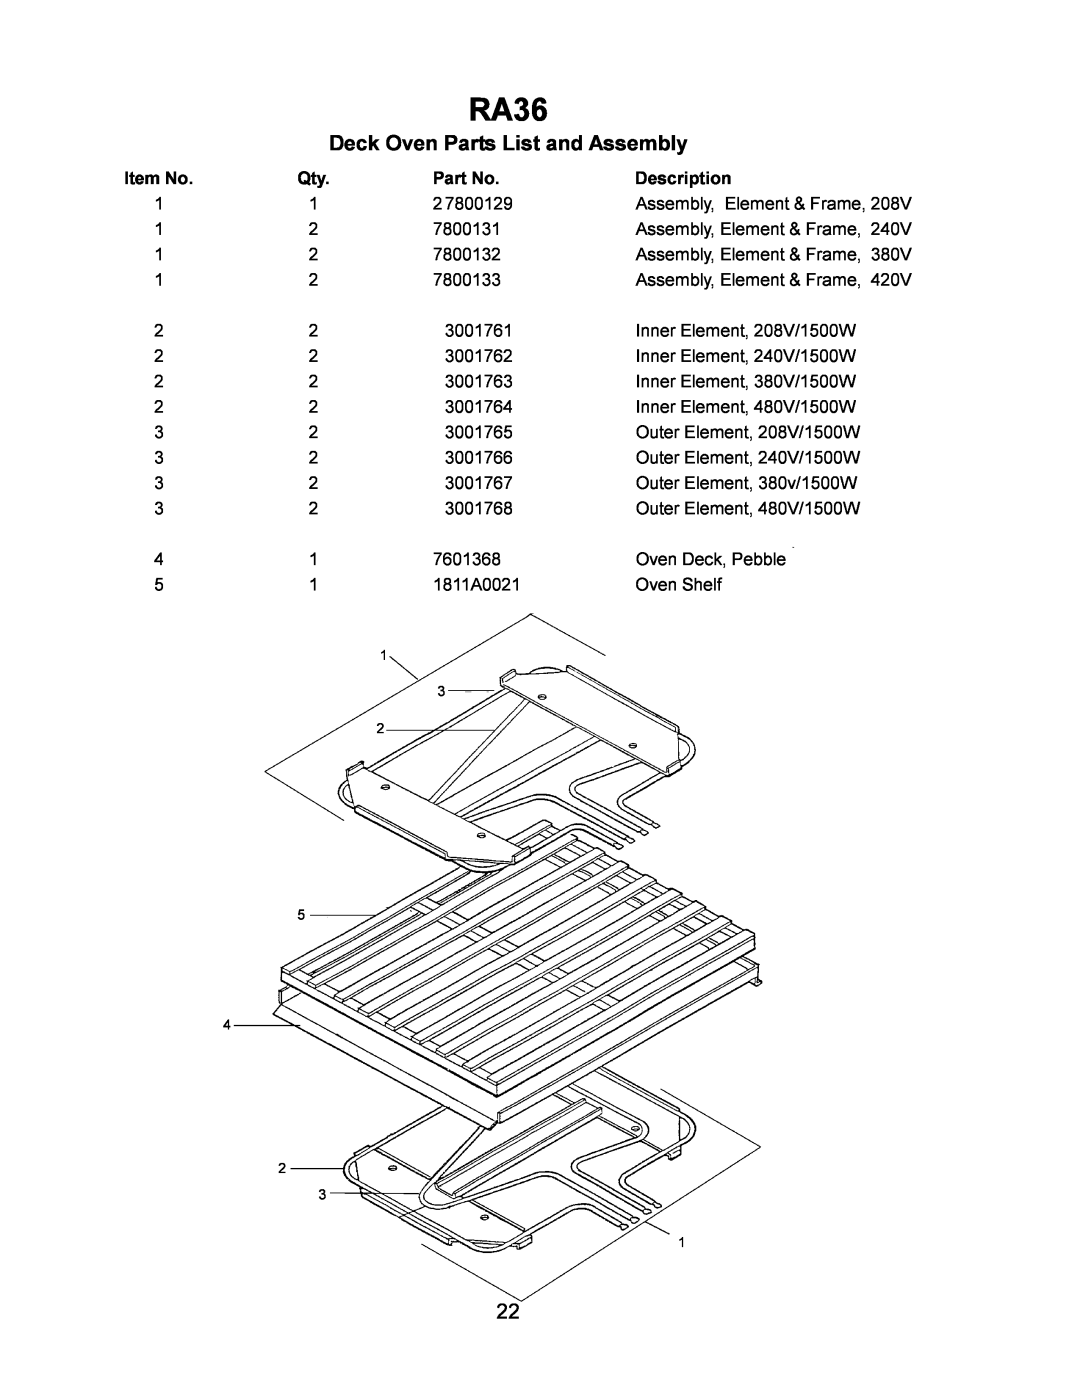 Toastmaster RA36C, RA36M, RA36D manual Deck Oven Parts List and Assembly, Description 